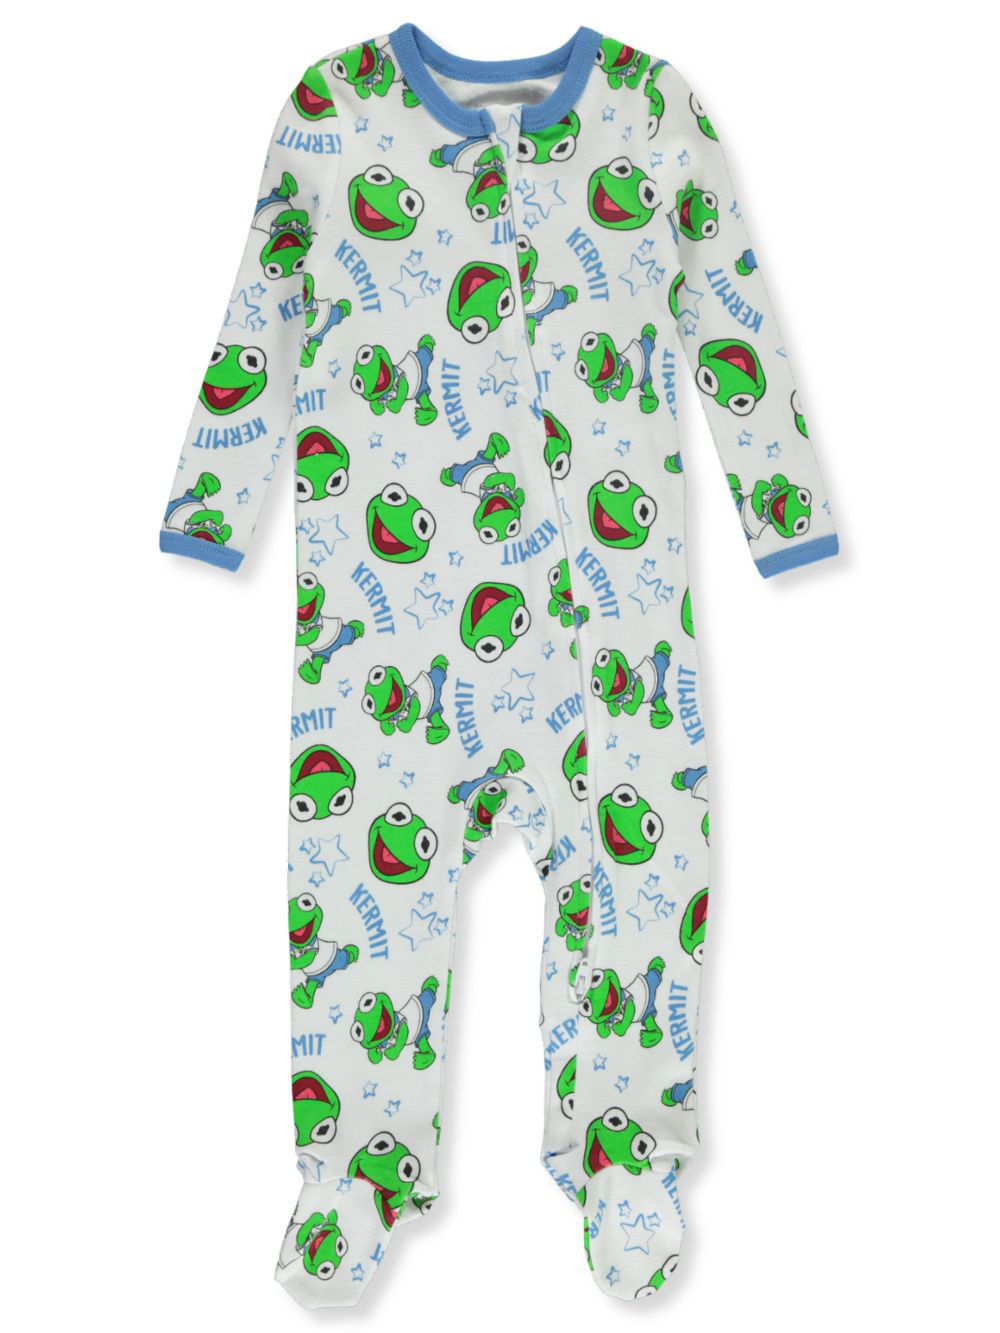 Muppet Babies Coveralls